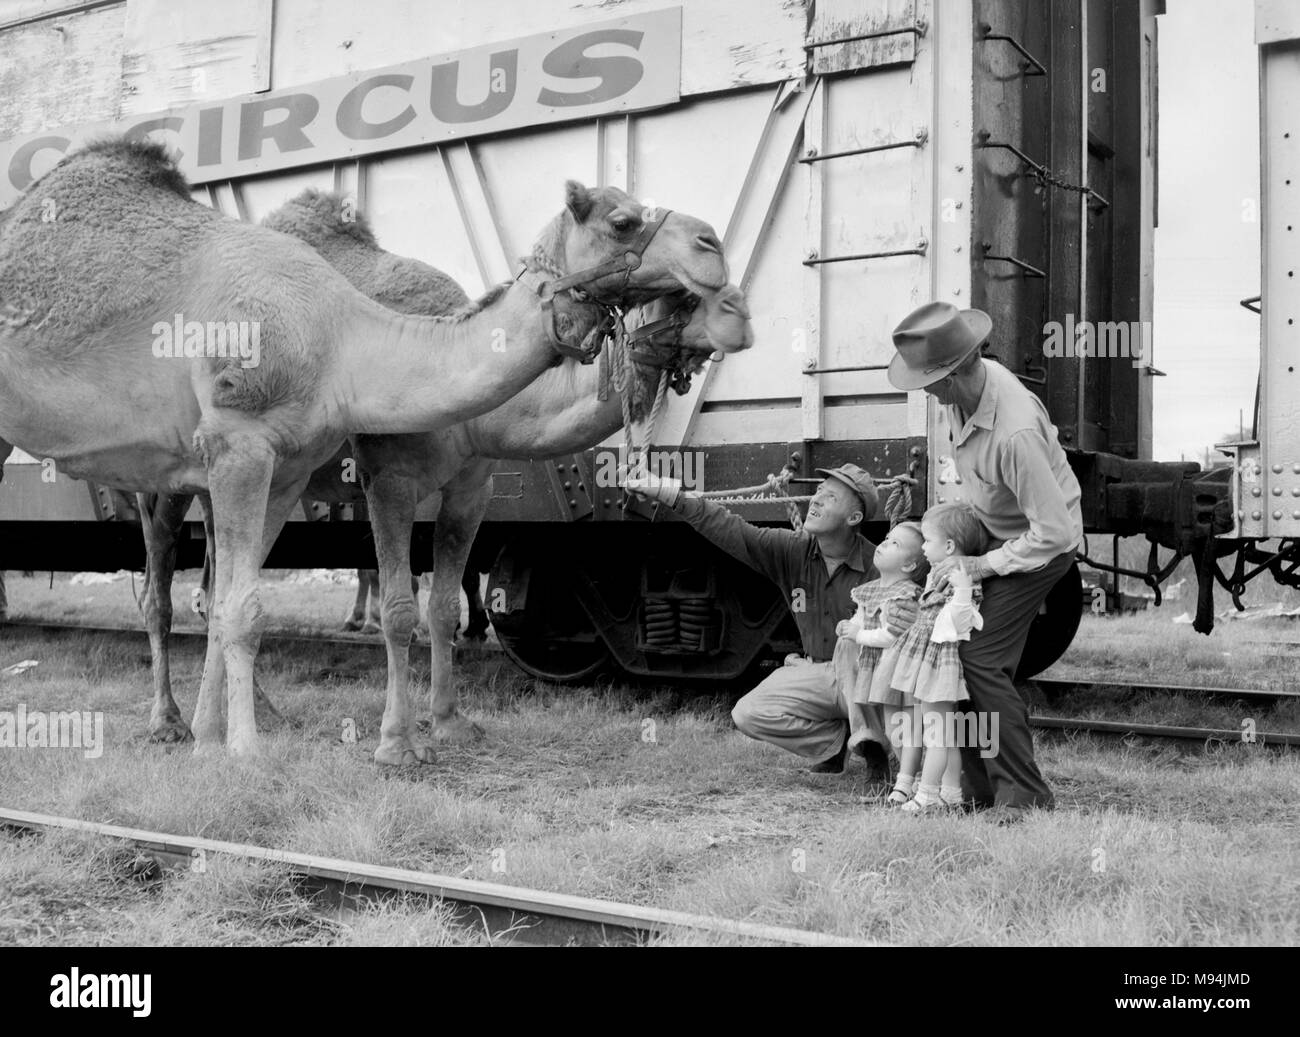 Two little girls get an up close meeting with two camels during animal unloading at the Clyde Beatty Circus in Georgia, ca. 1956. Stock Photo